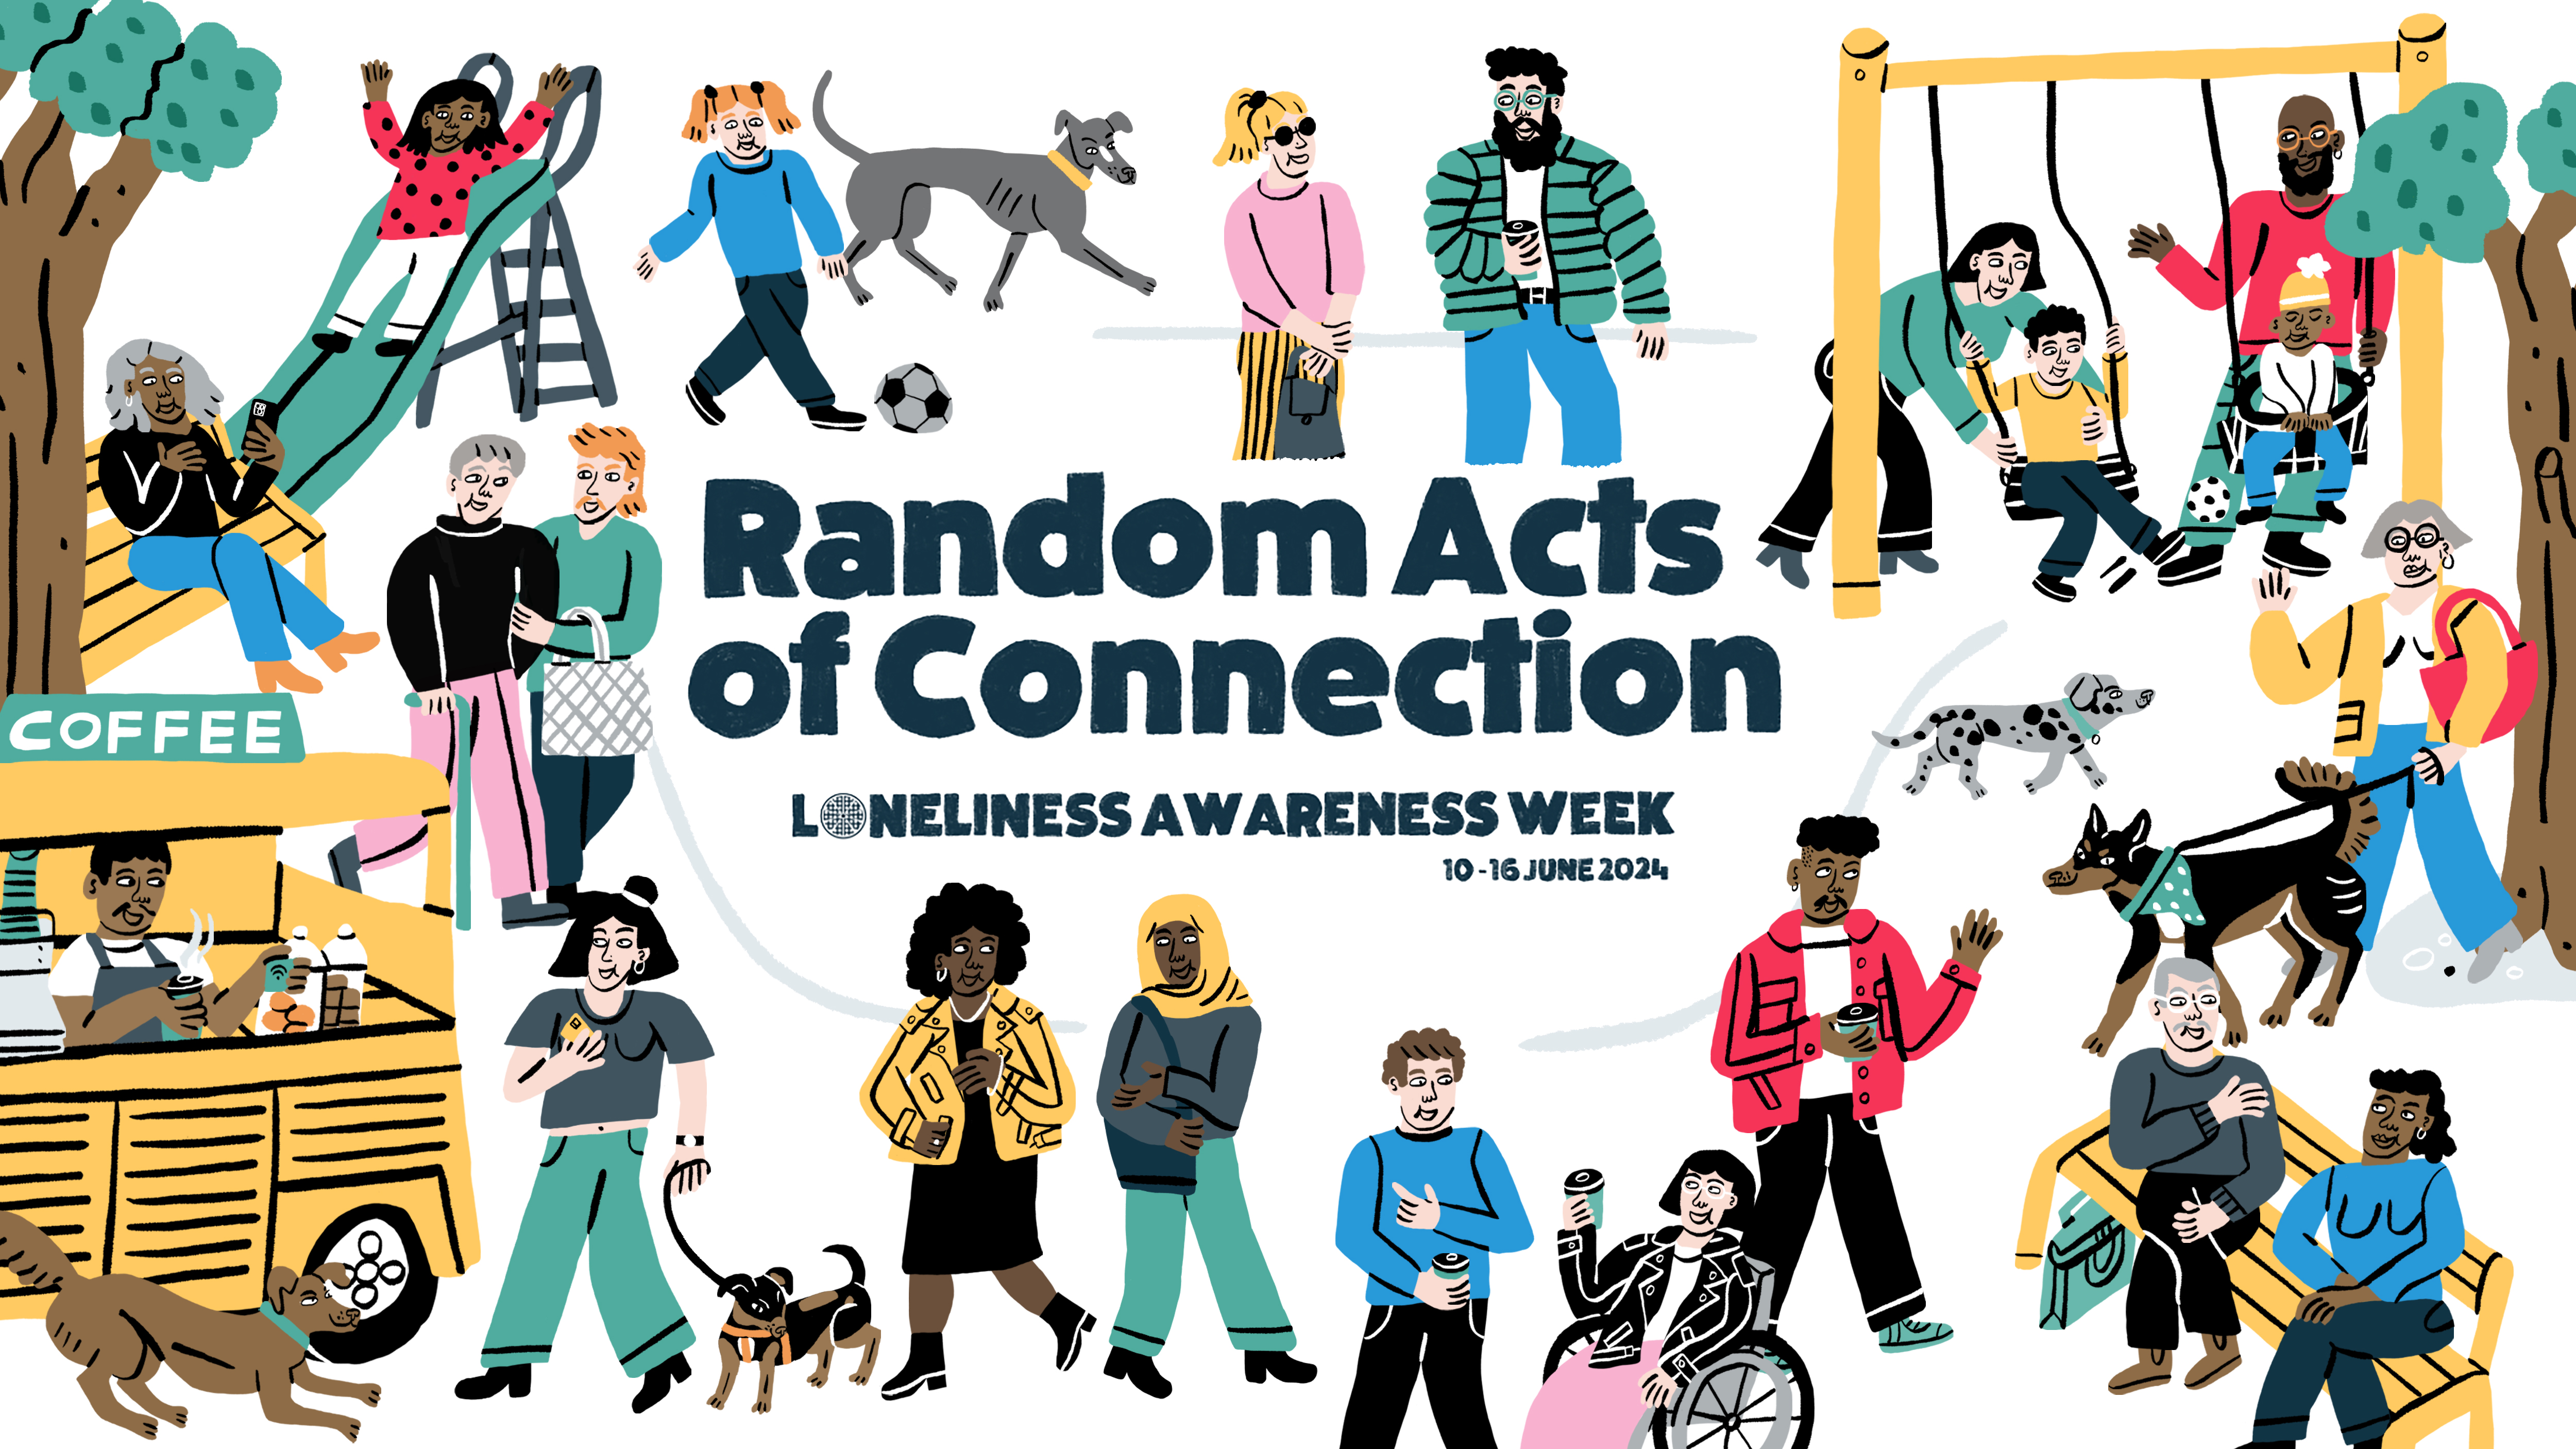 Image depicts an illustration of random acts of connection for Loneliness Awareness Week 2024